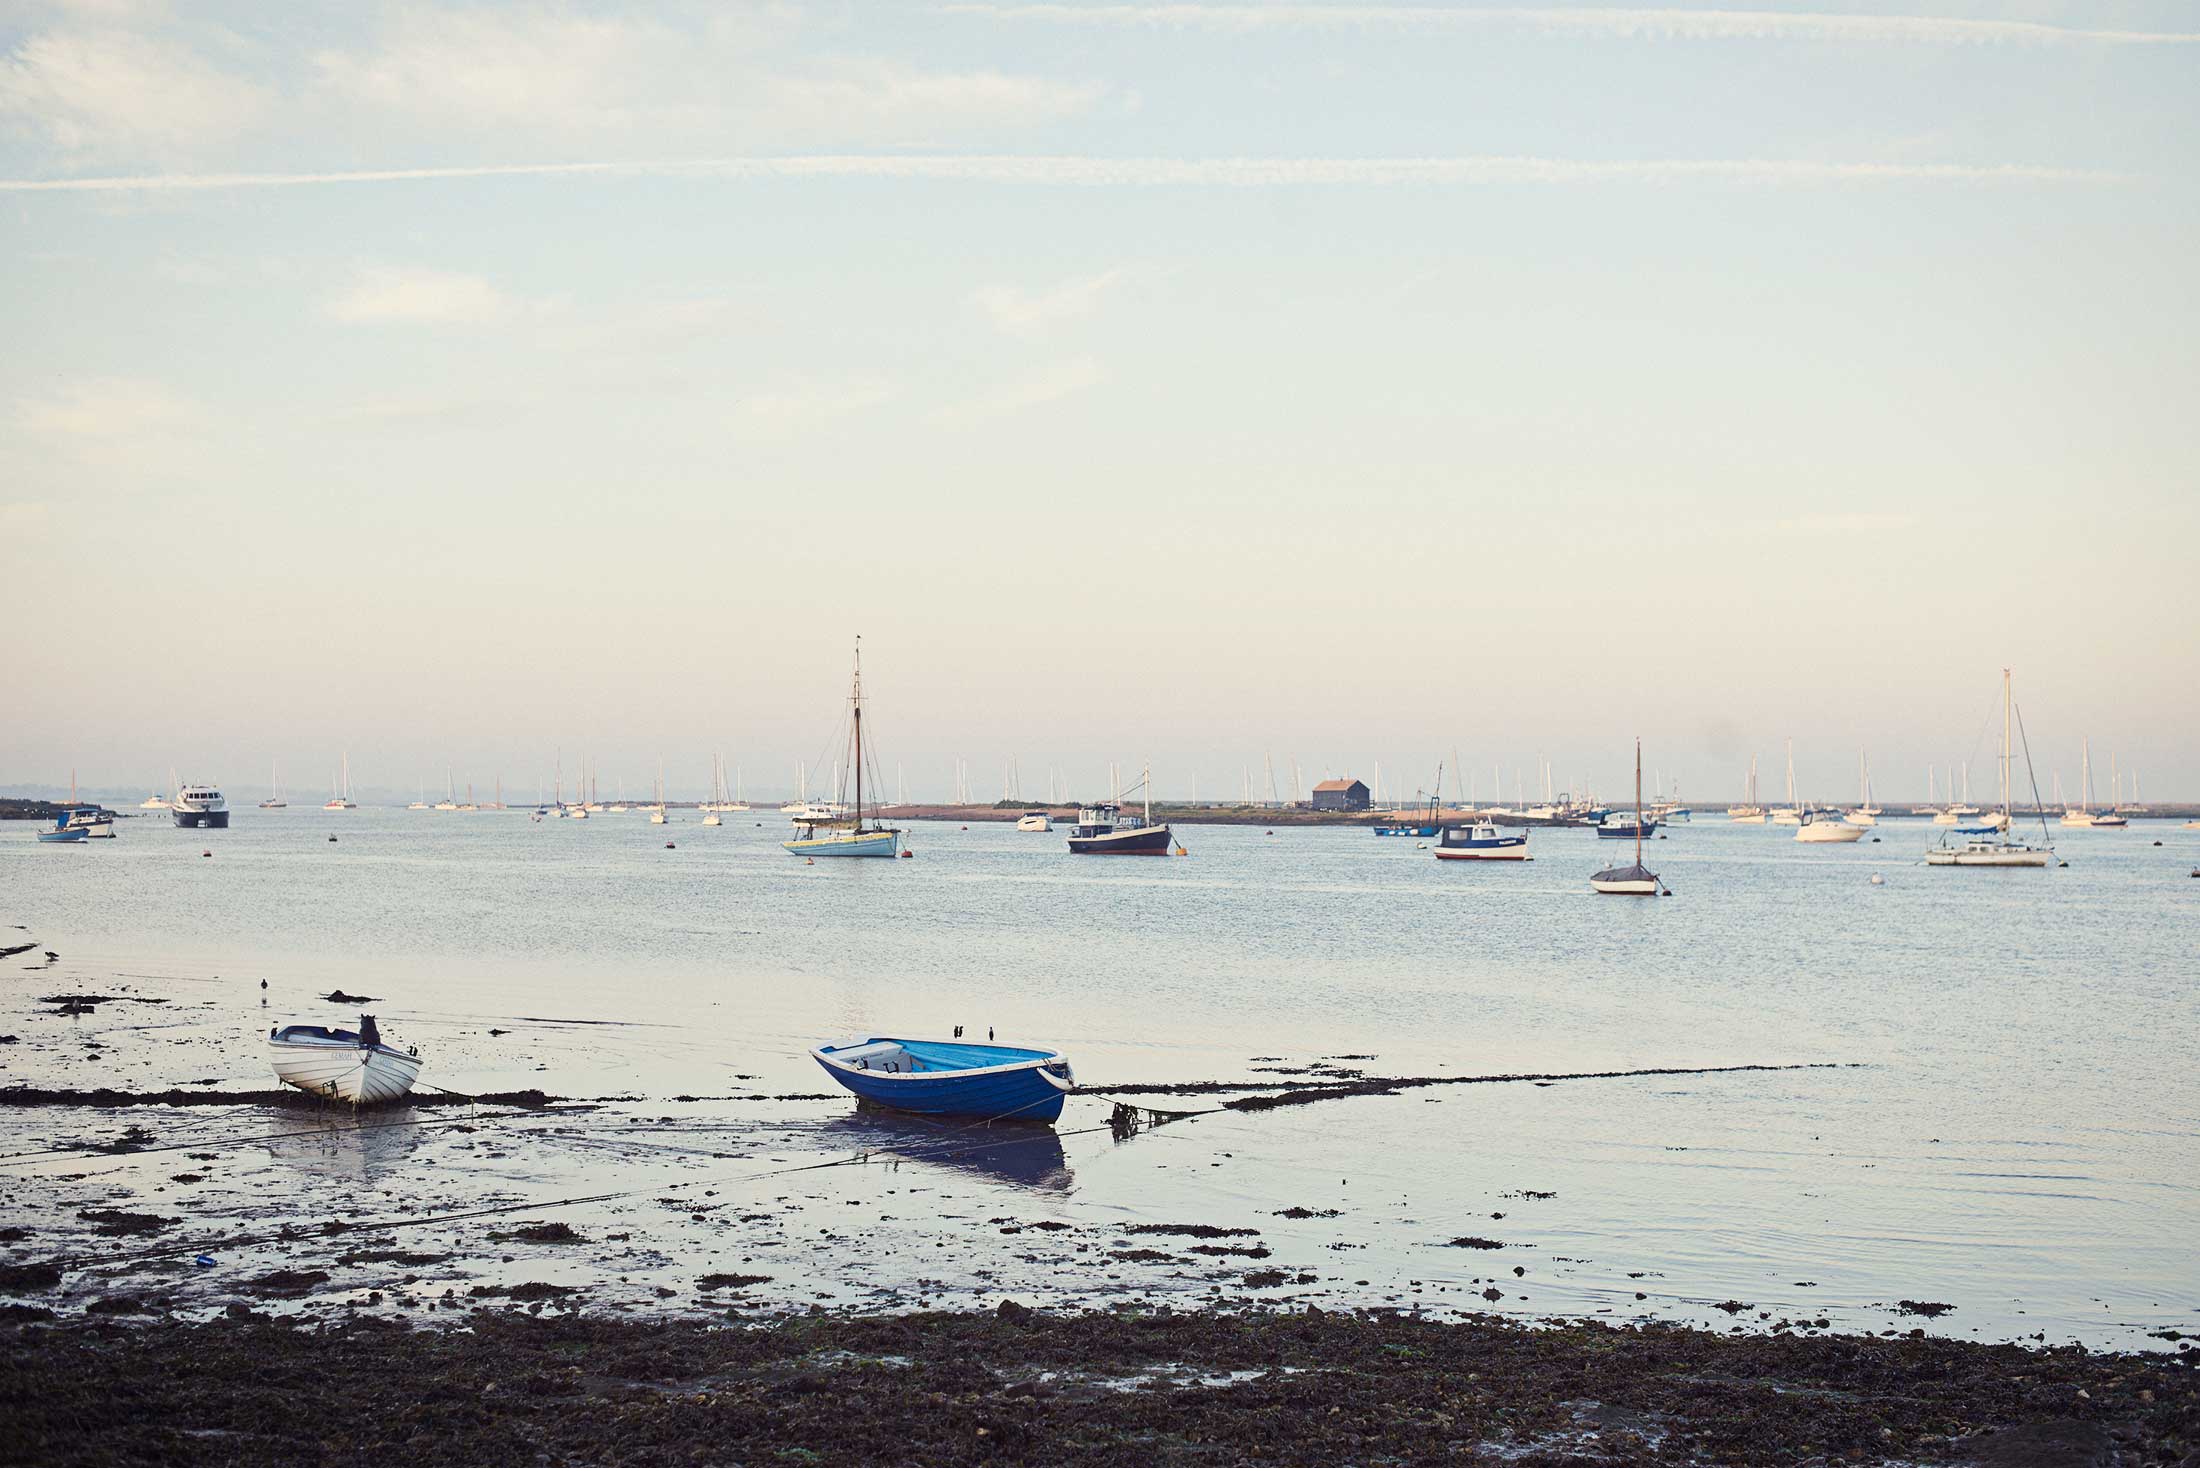 Boats in harbour - Mersea Island - Beresfords Estate agents - Essex